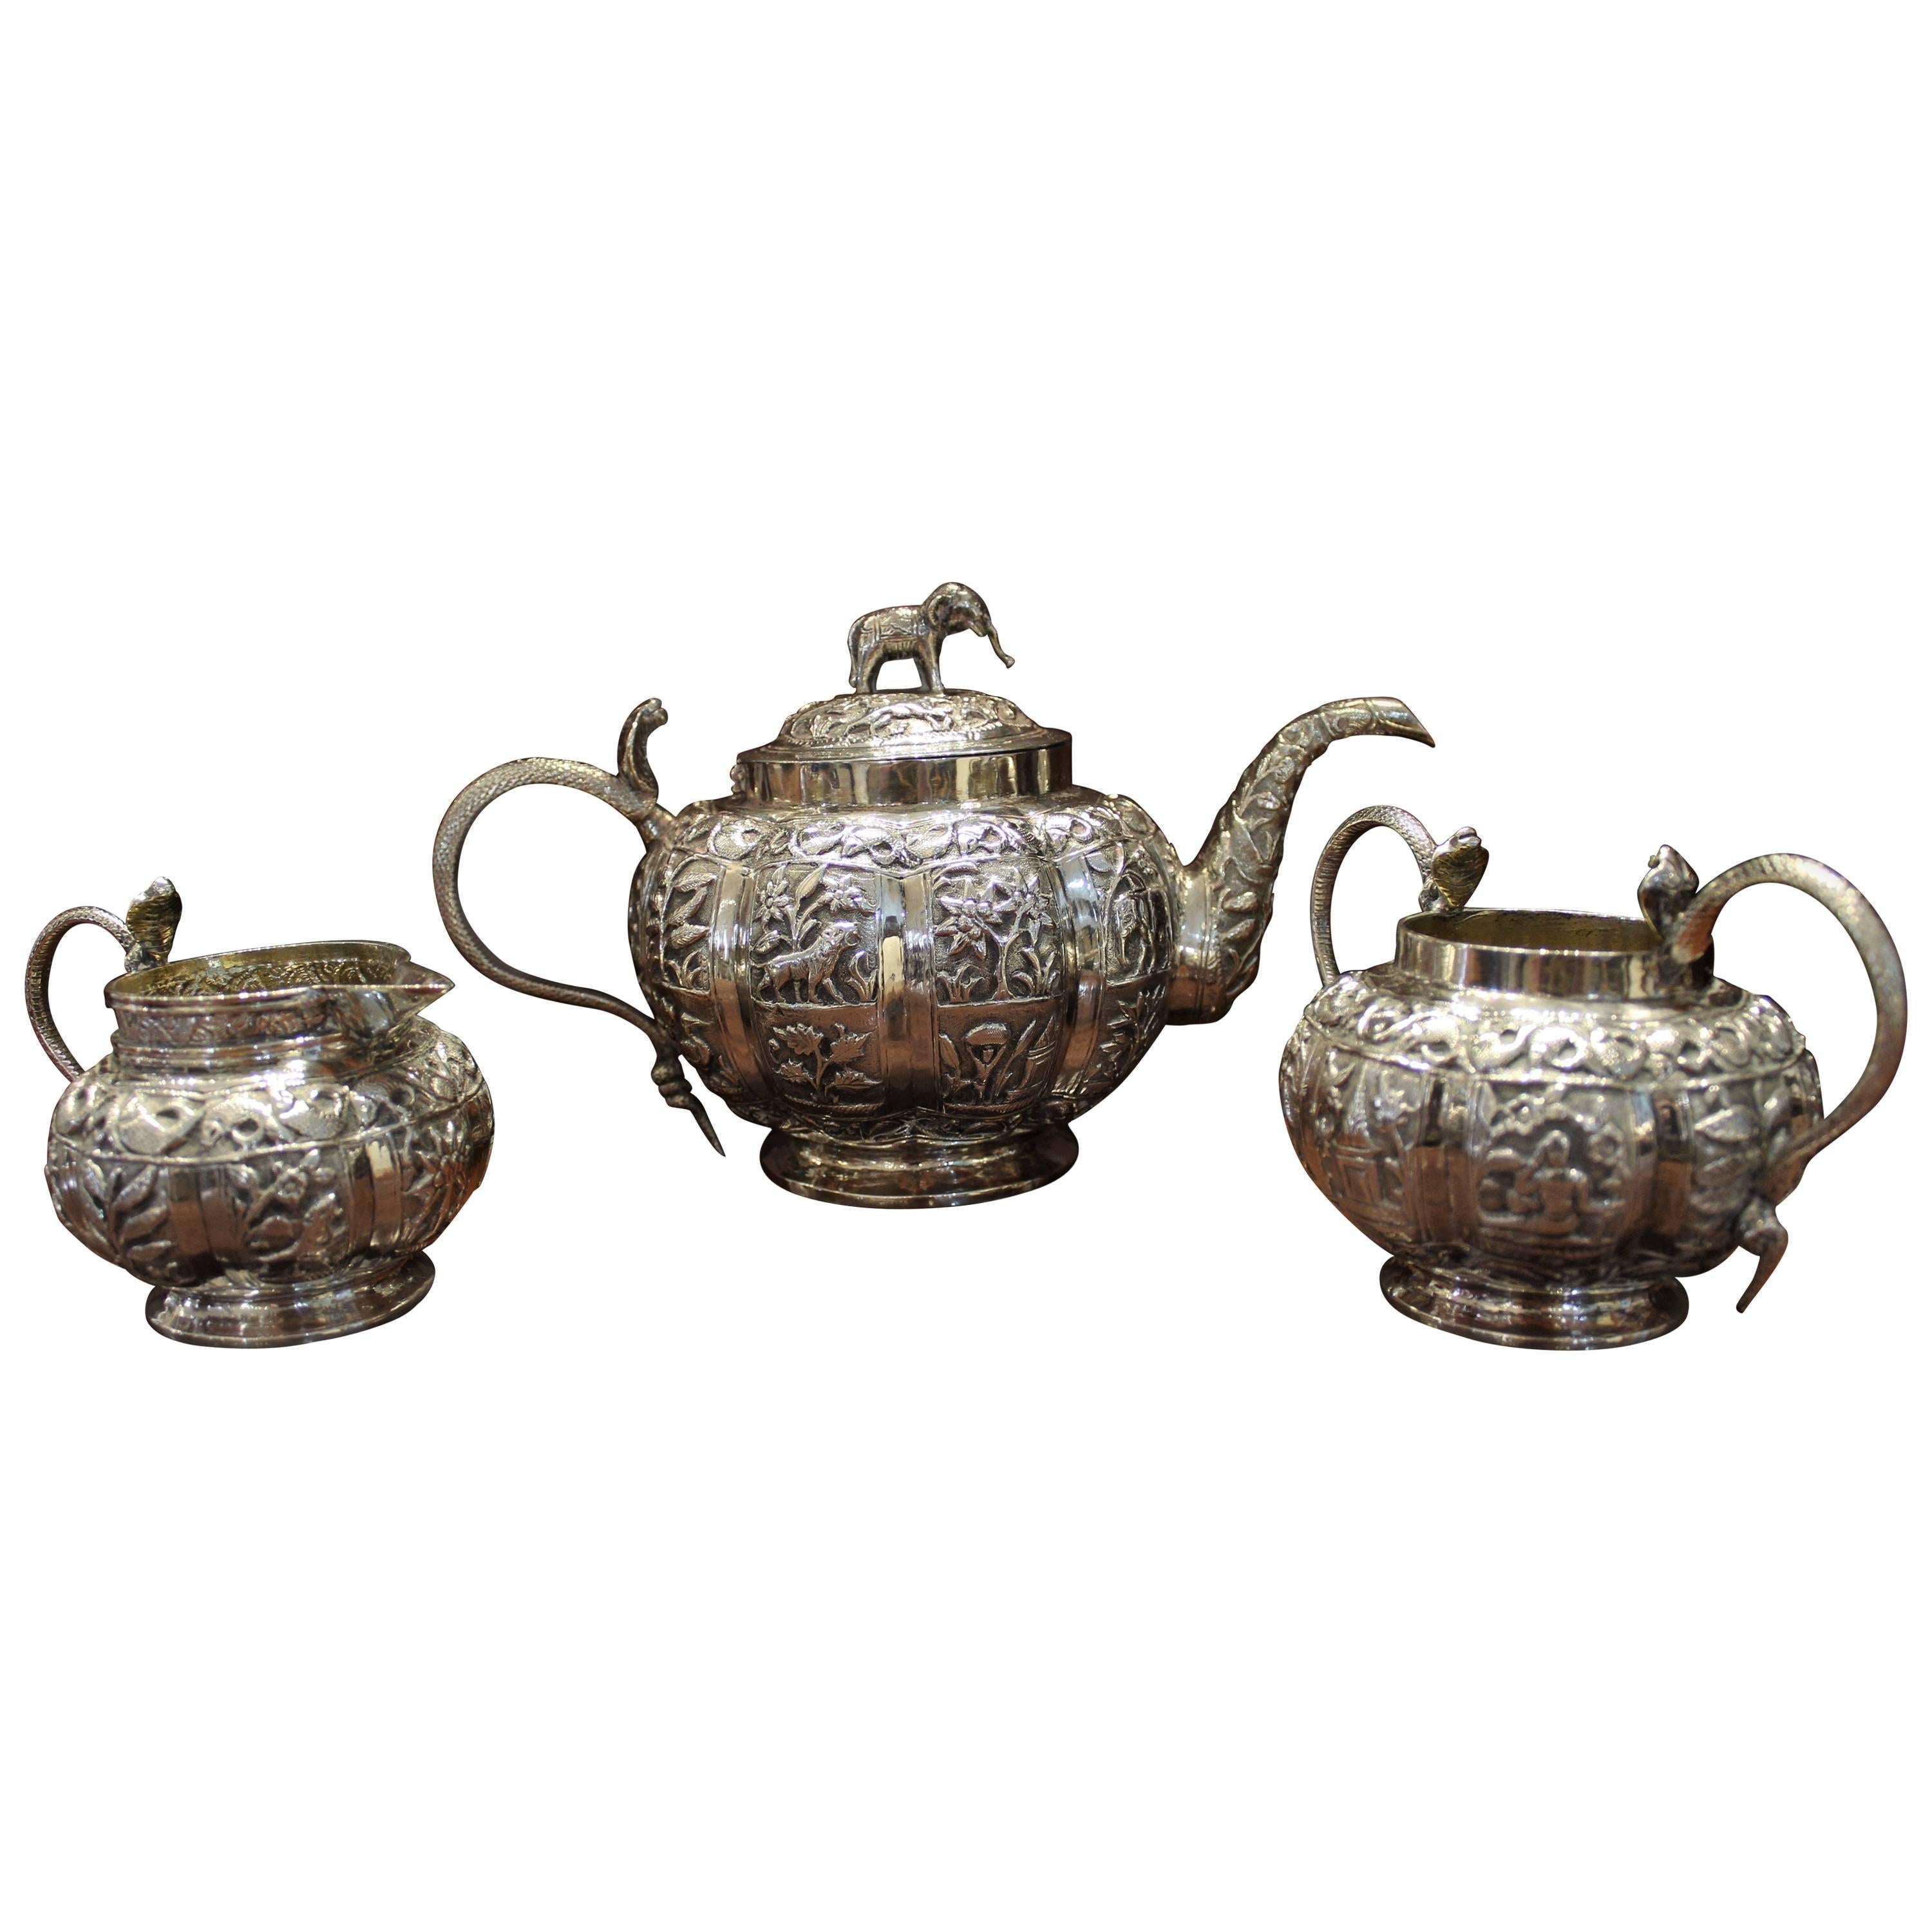 Anglo-Indian Sterling Silver Tea Set